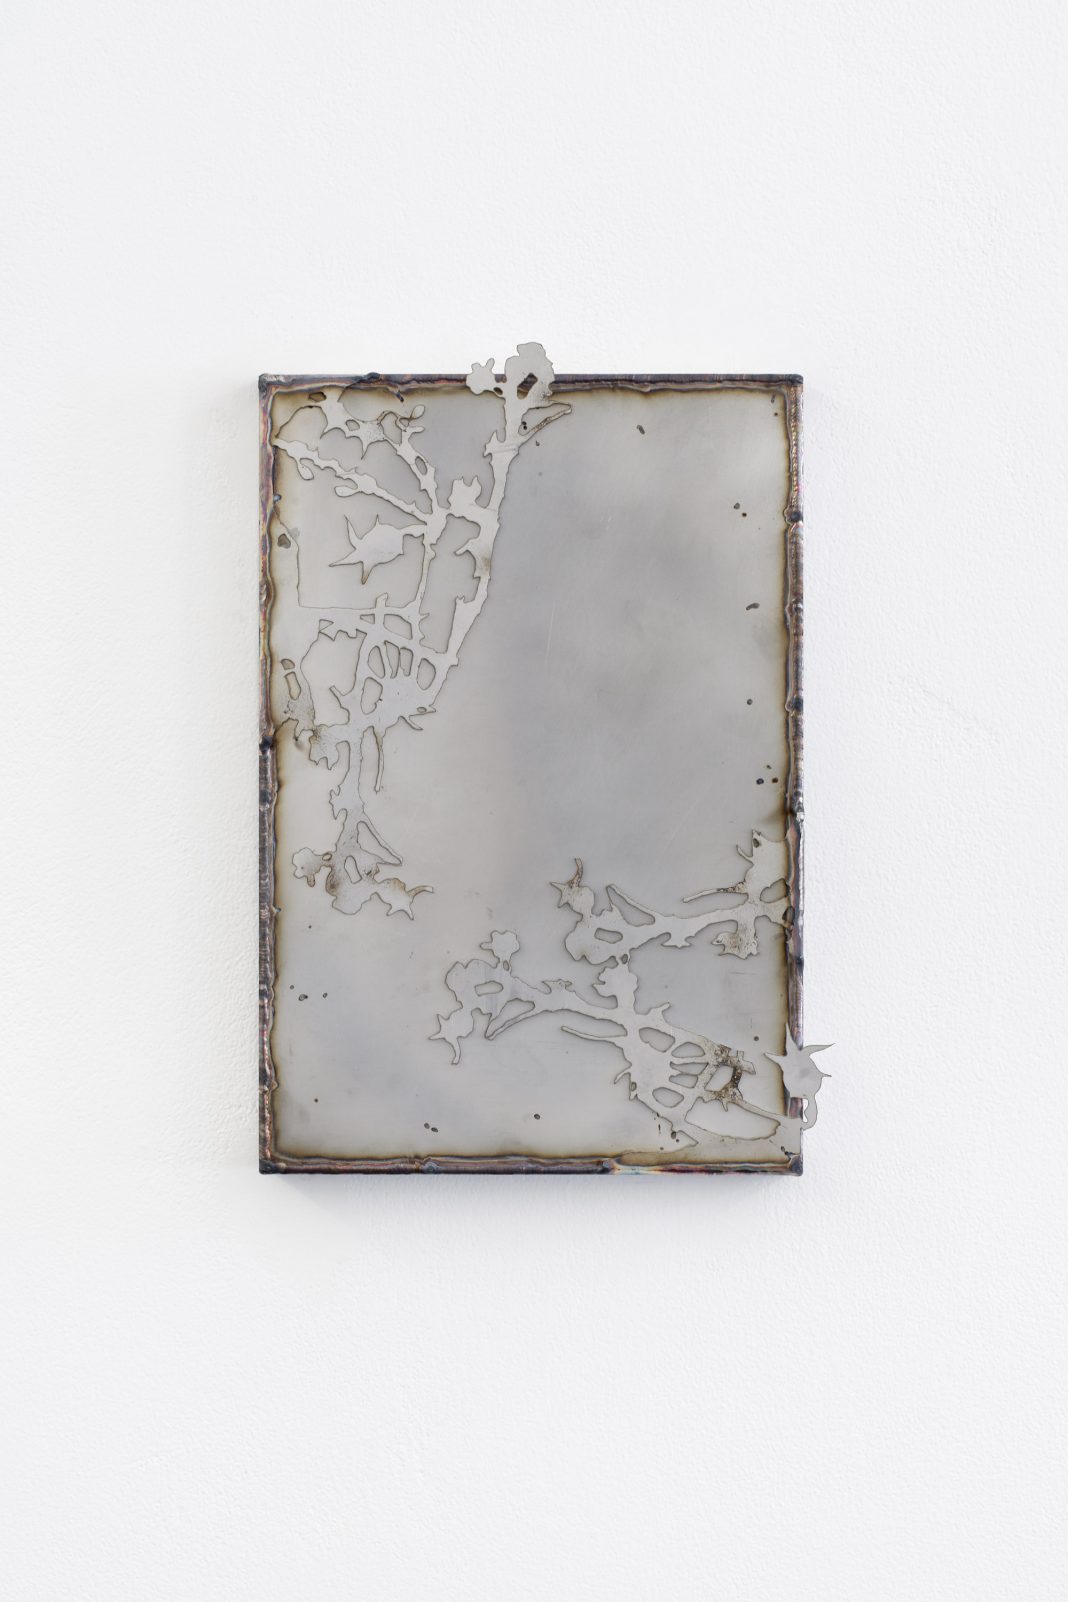 Inside Job – Breathing in the Shallowshttps://www.exibart.com/repository/media/formidable/11/img/a80/Inside-Job-Thistle-mirror-II-2020-steel-23x34x4cm-courtesy-of-the-artists-and-eastcontemporary-1068x1602.jpg